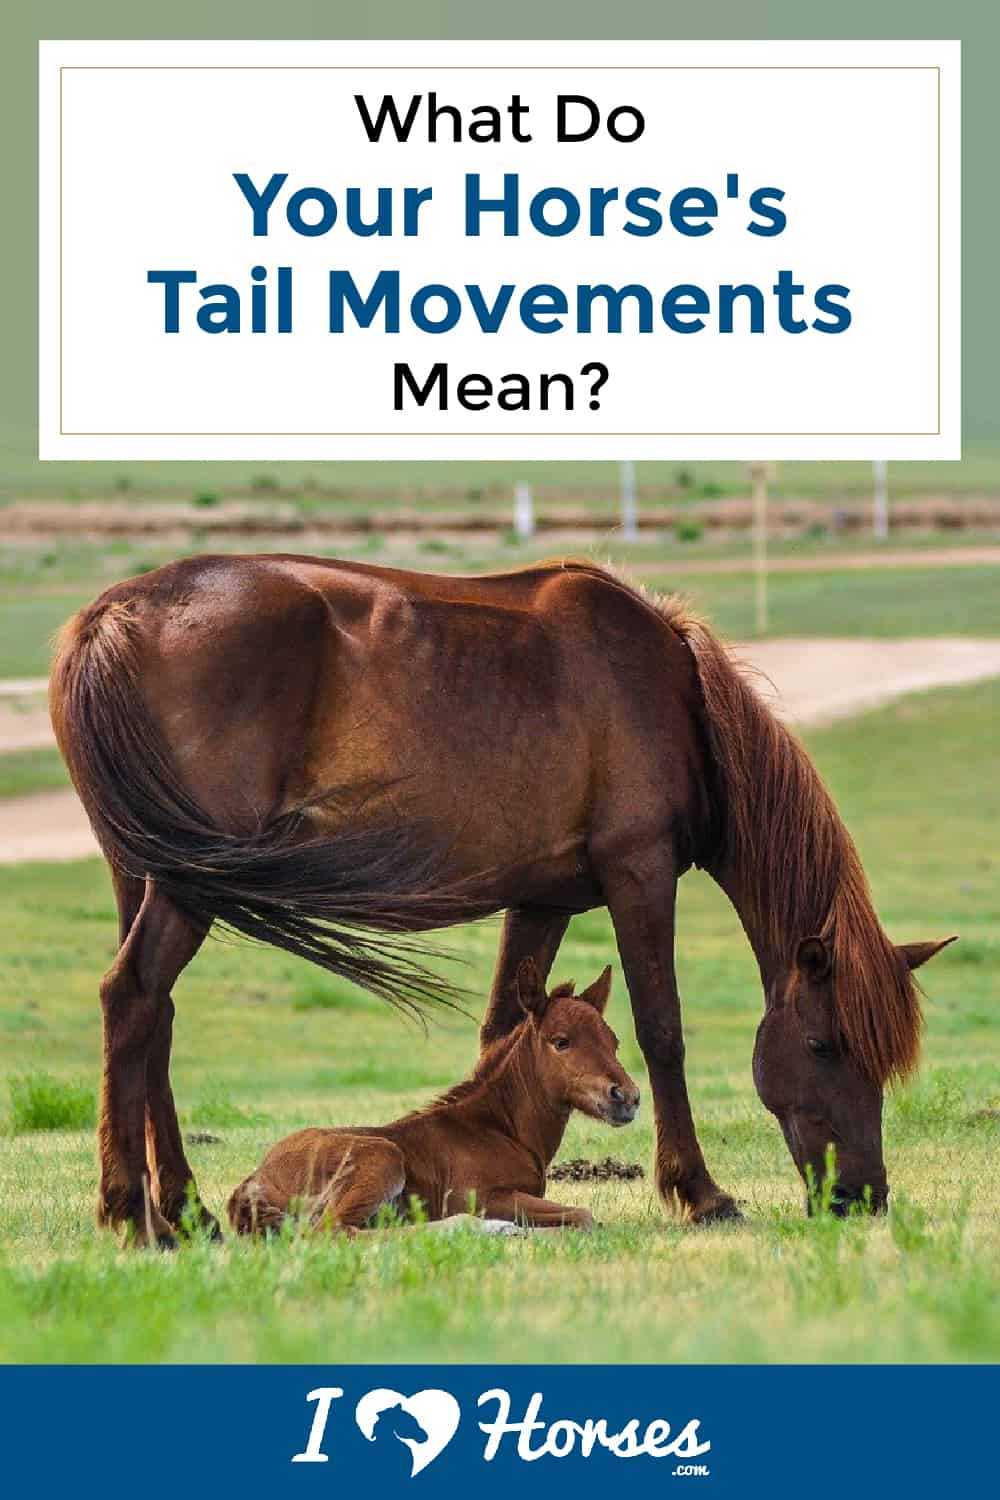 What Your Horse's Tail Movements Mean-02-02